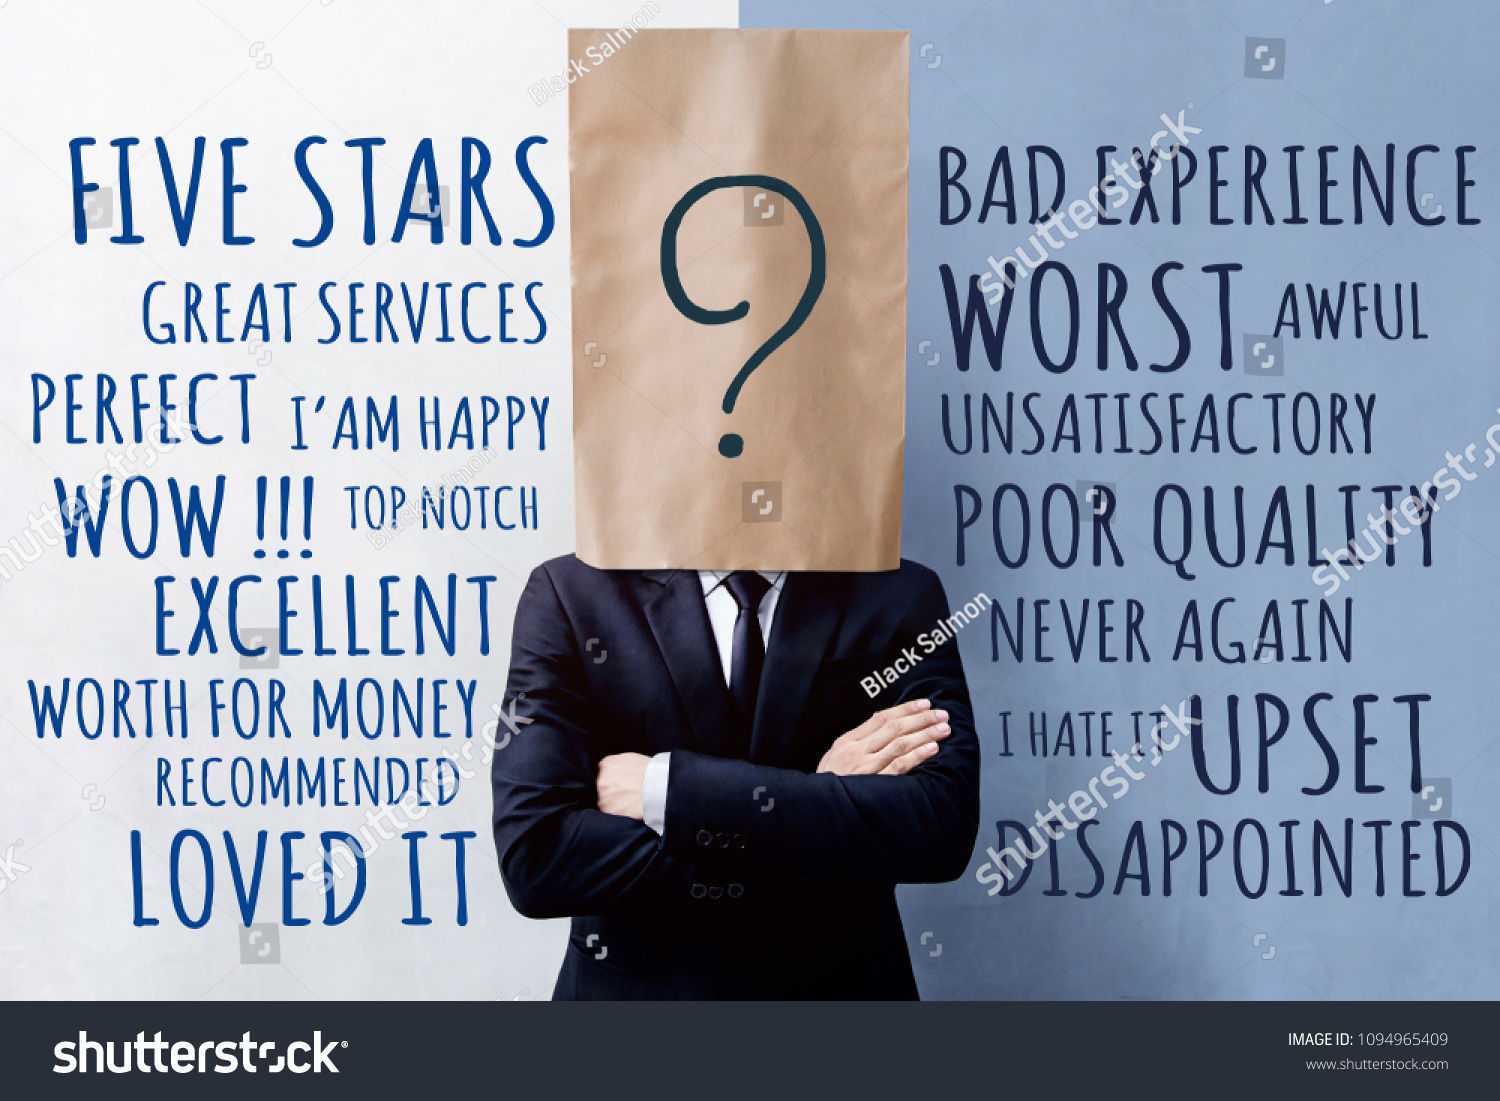 Customer Experience Concept, Businessman Client with Question Mark Icon on Paper Bag, Crossed arms and wearing Suit. Concrete Wall with Wording of Positive and Negative Reviews #1094965409